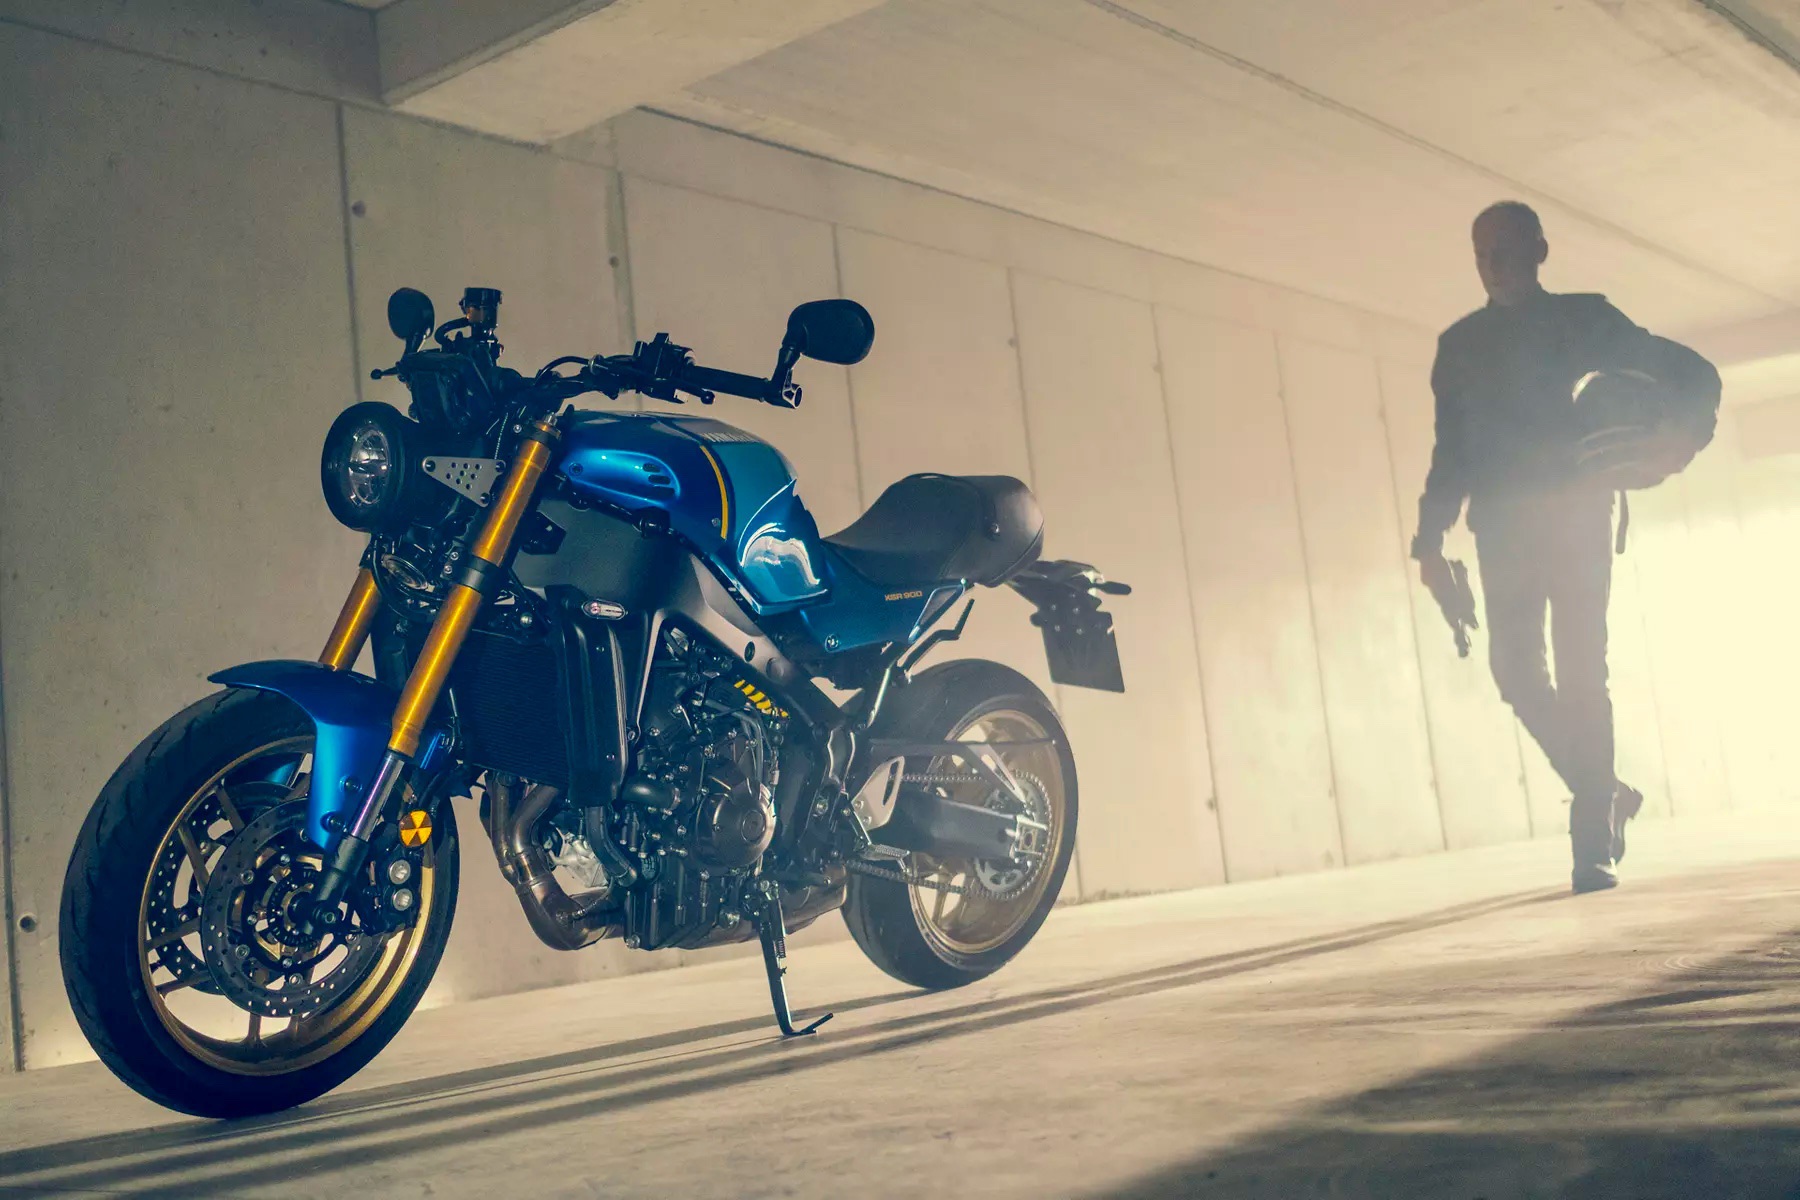 A man approaches the 2022 Yamaha XSR900 motorcycle - front 3/4 profile in a garage